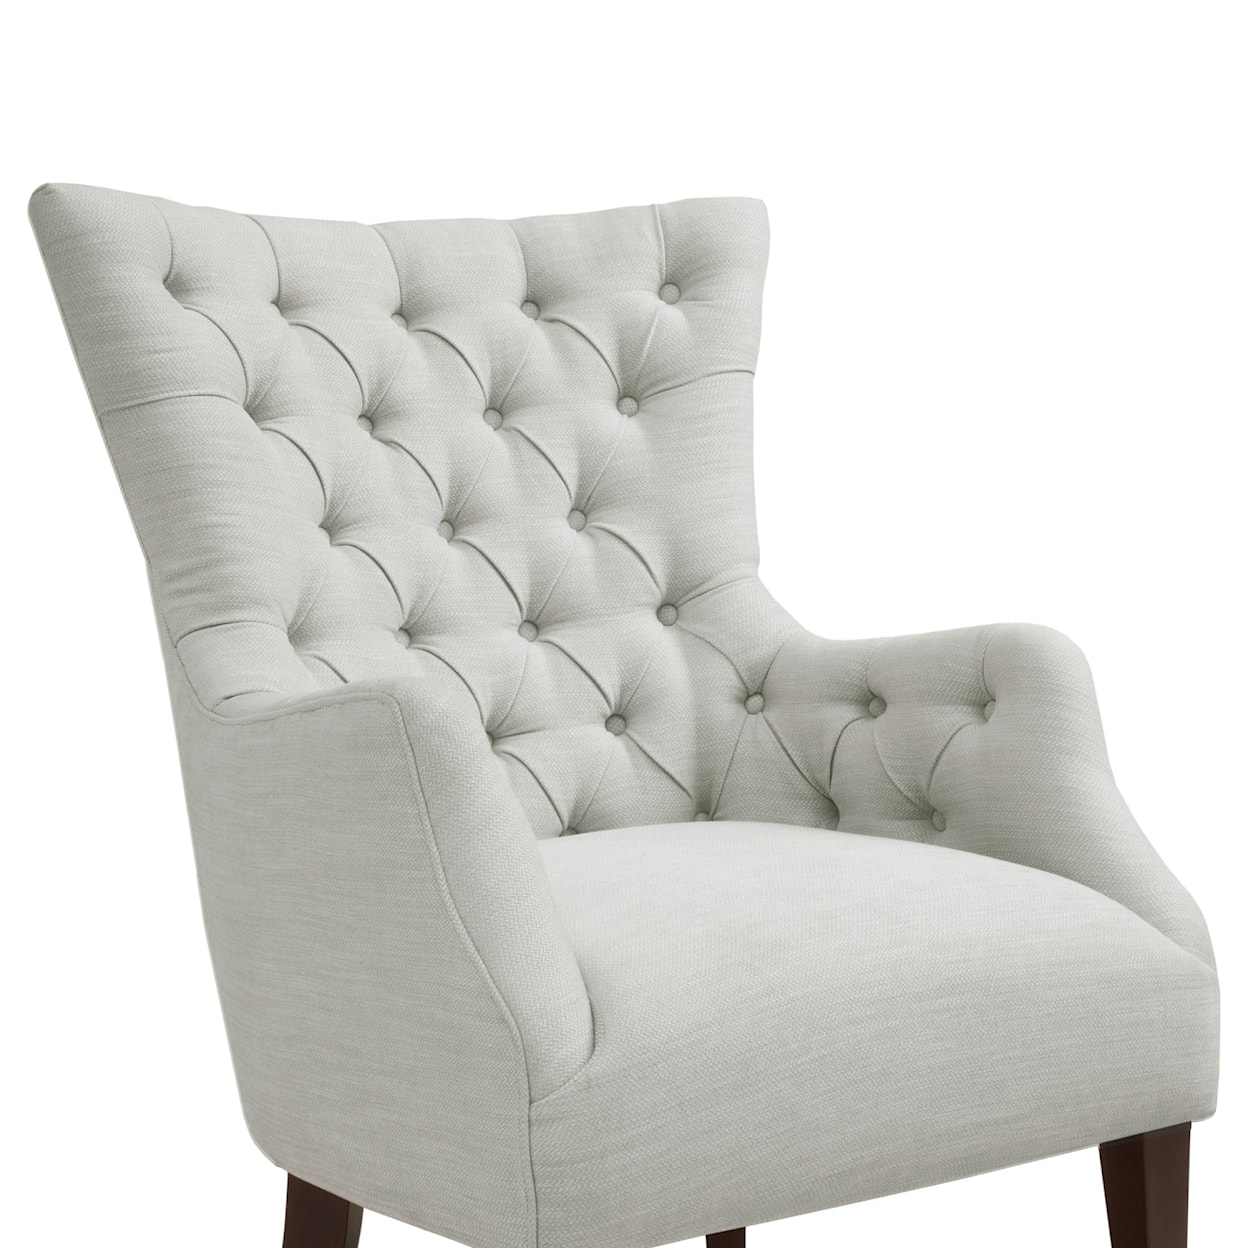 JLA Home Home Accents Tufted Wing Chair